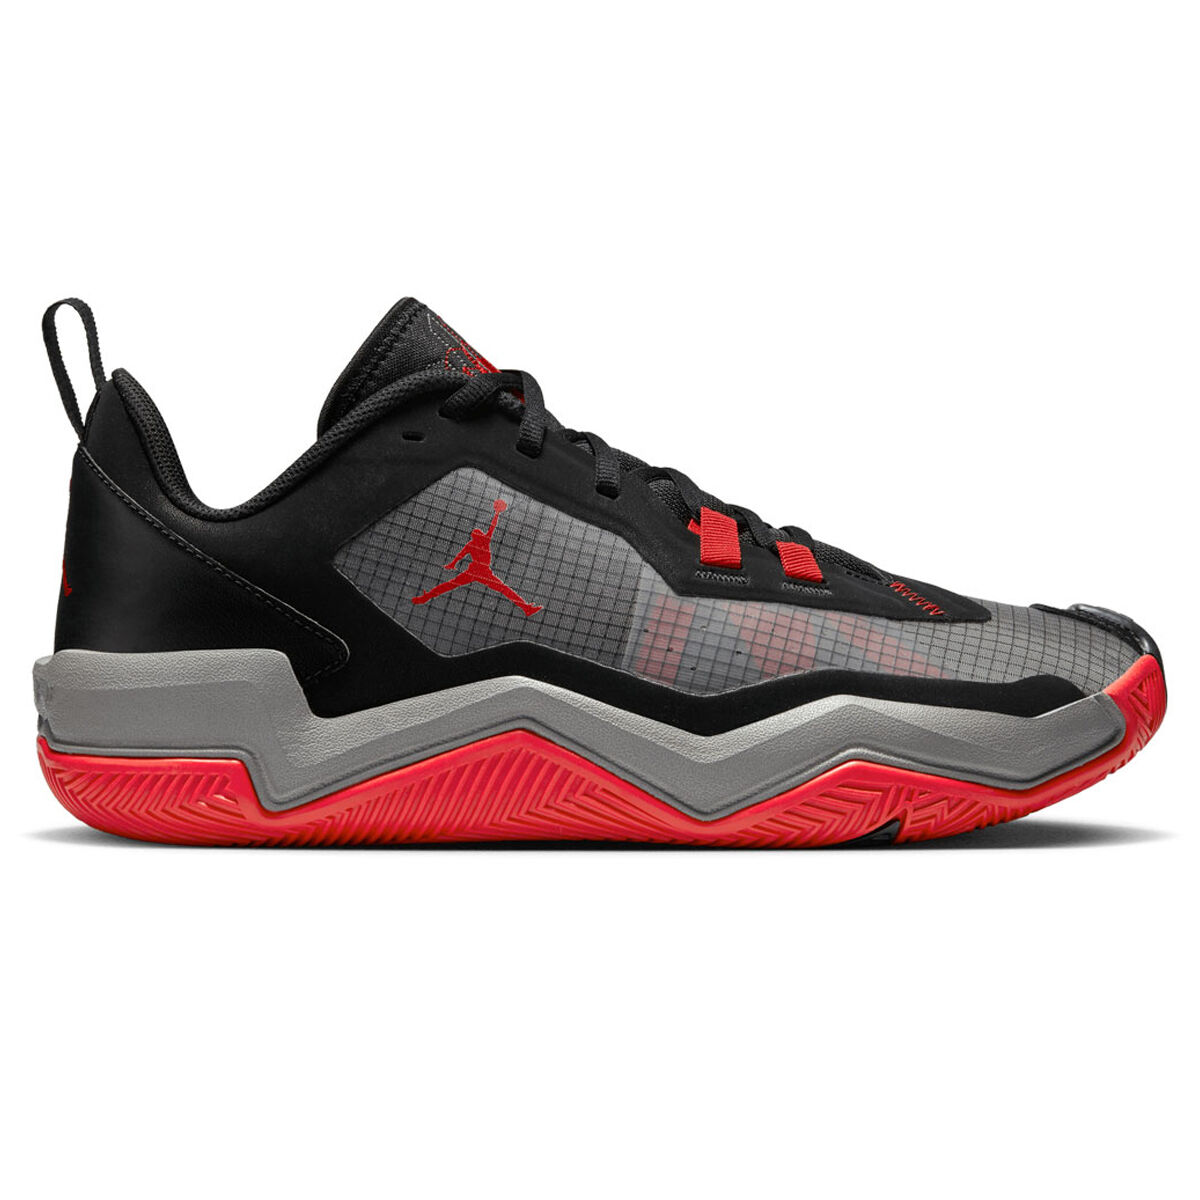 black and red jordan basketball shoes